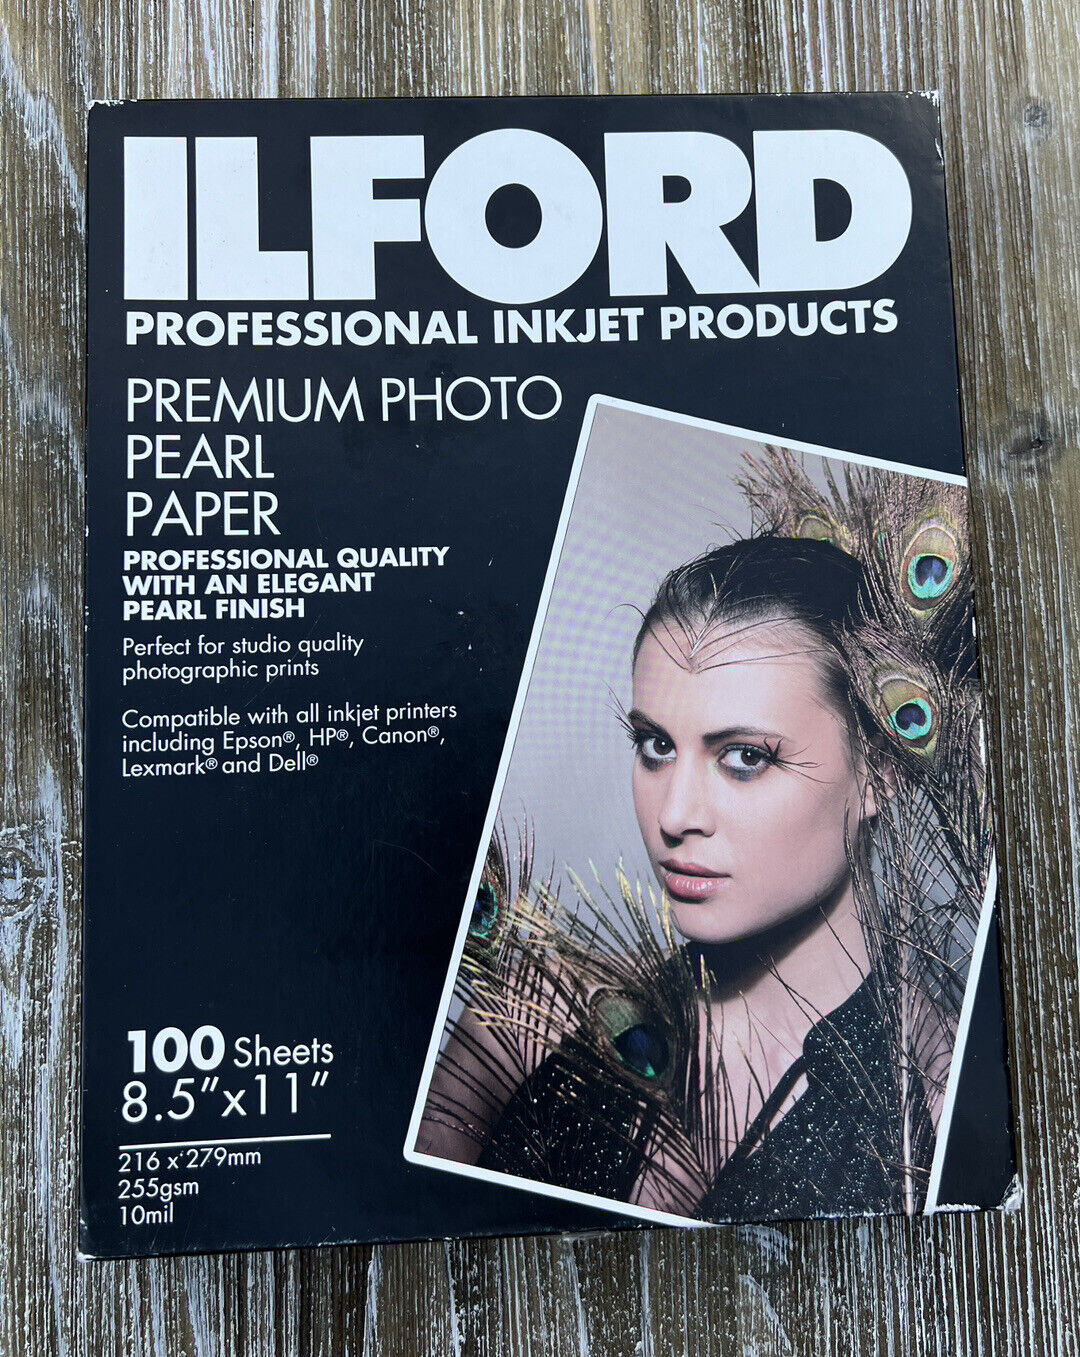 ILFORD Professional INKJET Products 8.5x11 Premium Photo Pearl Paper 100 New